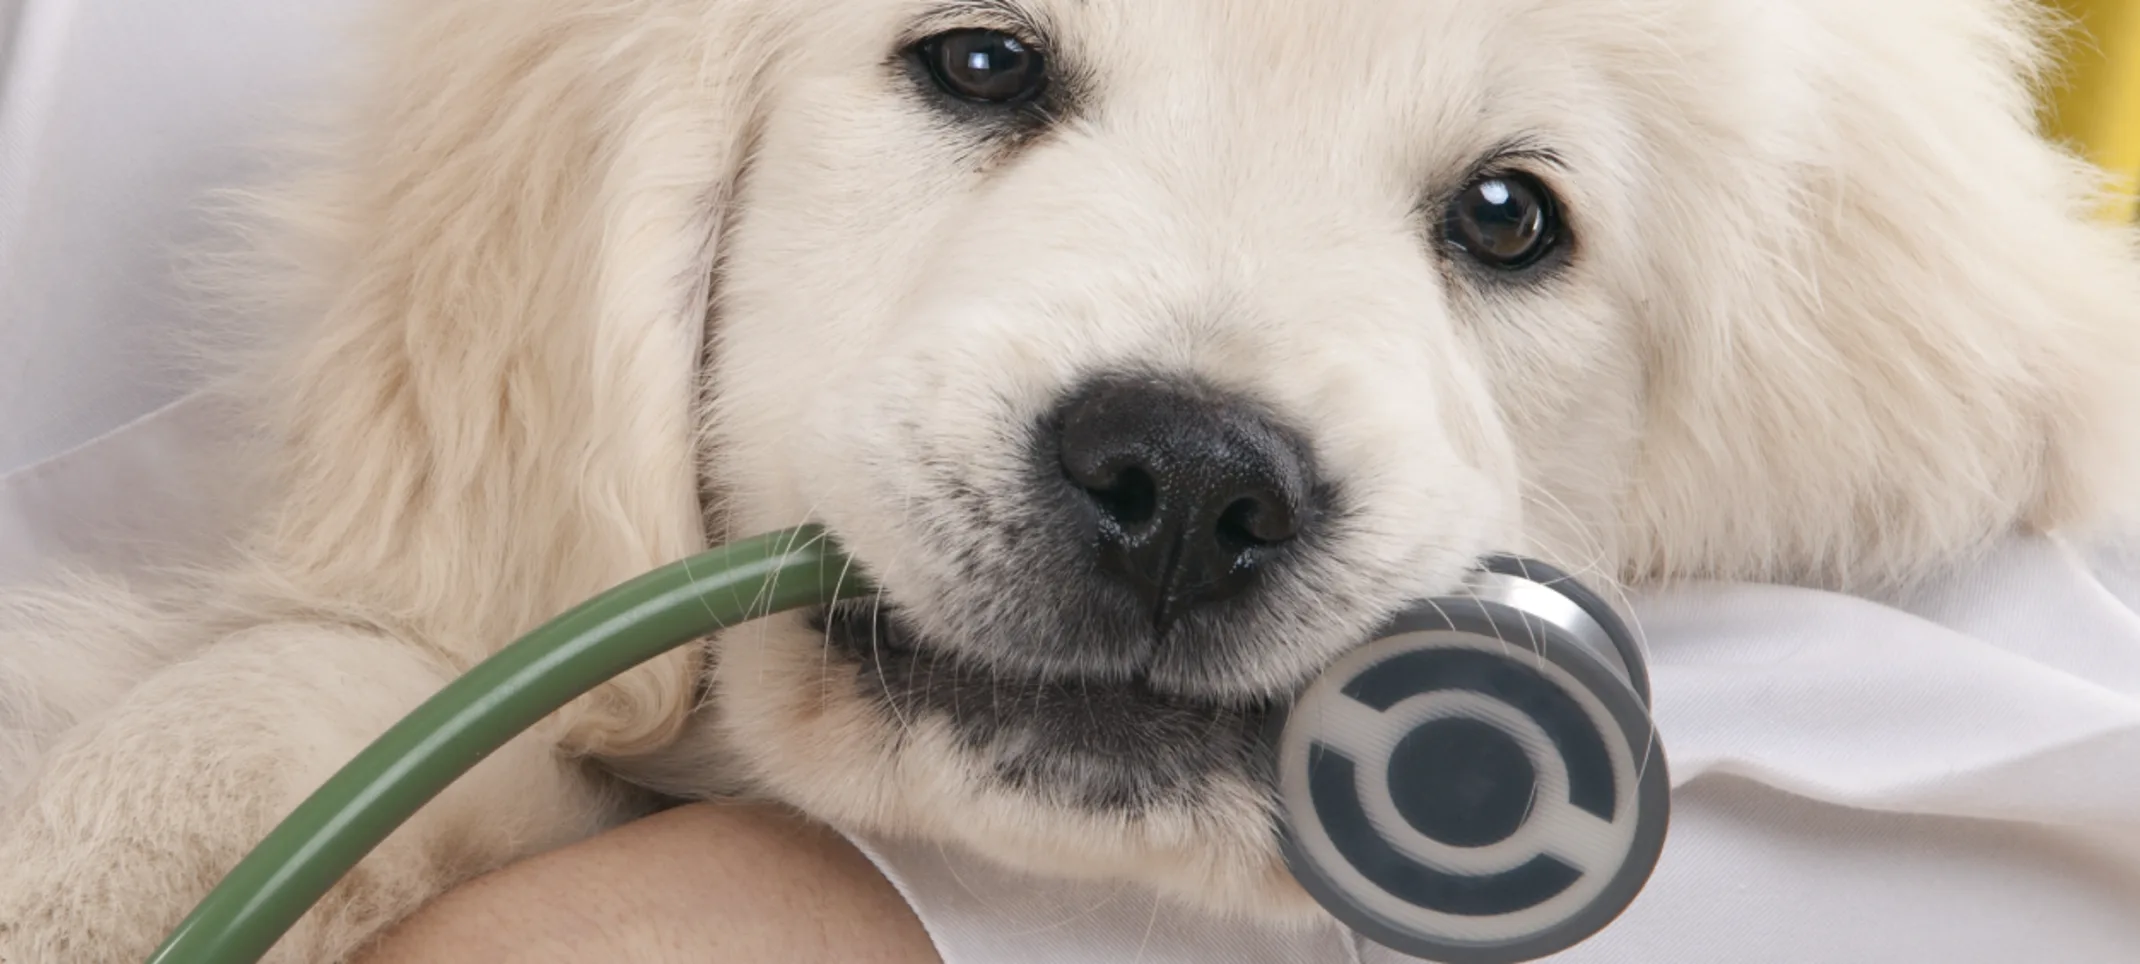 Little white puppy is being held in a doctor's arms with a stethoscope in his or her mouth.